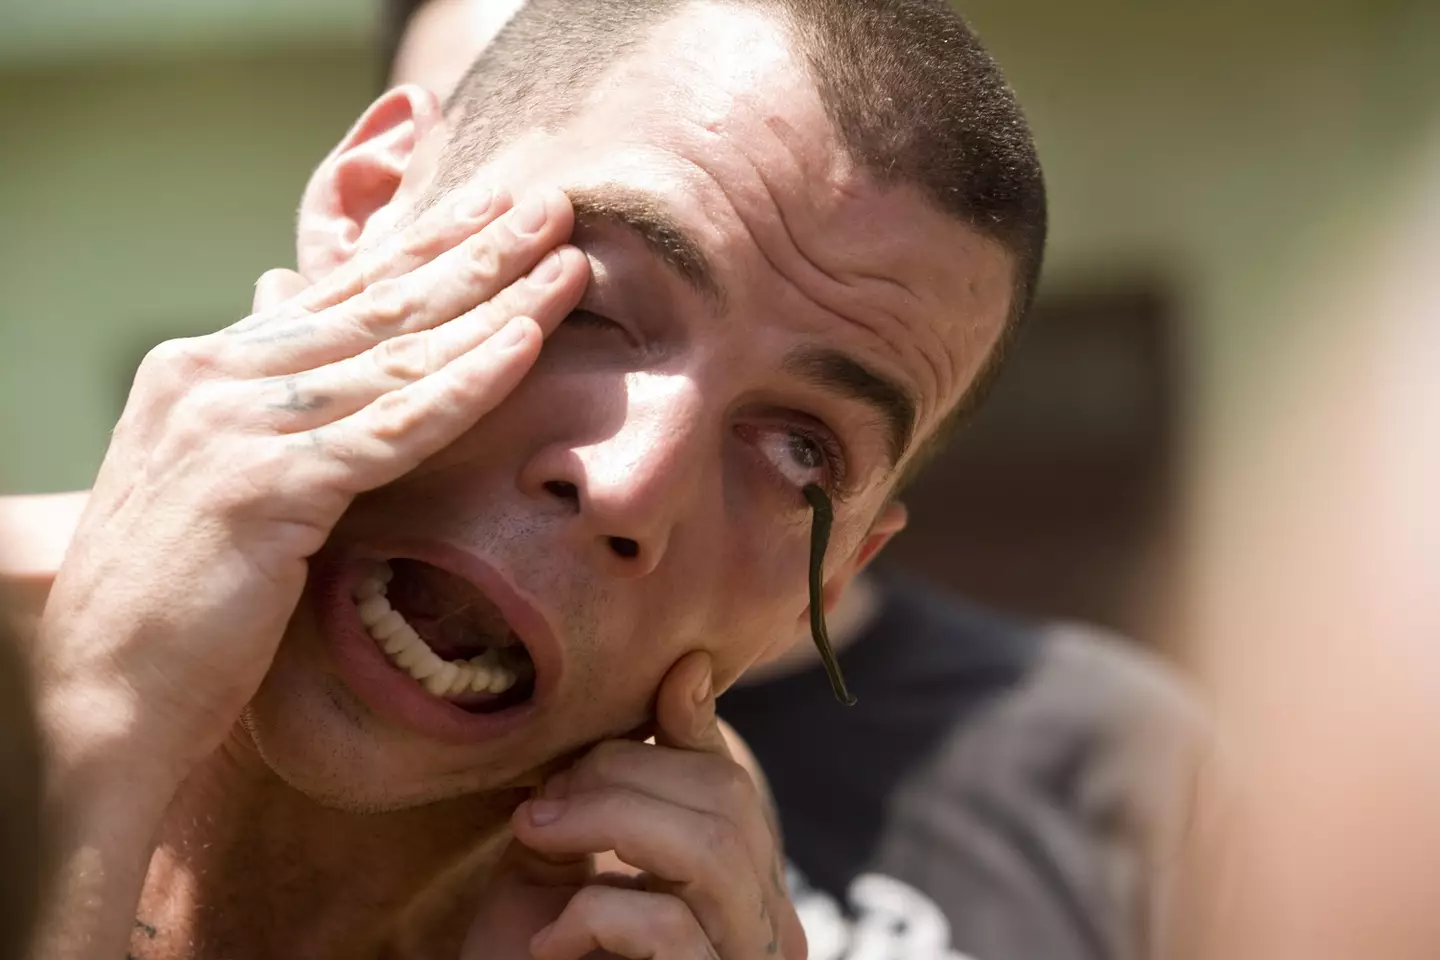 Steve-O has  battled with mental health issues along with addictions to cocaine, alcohol, ketamine, PCP and nitrous oxide.